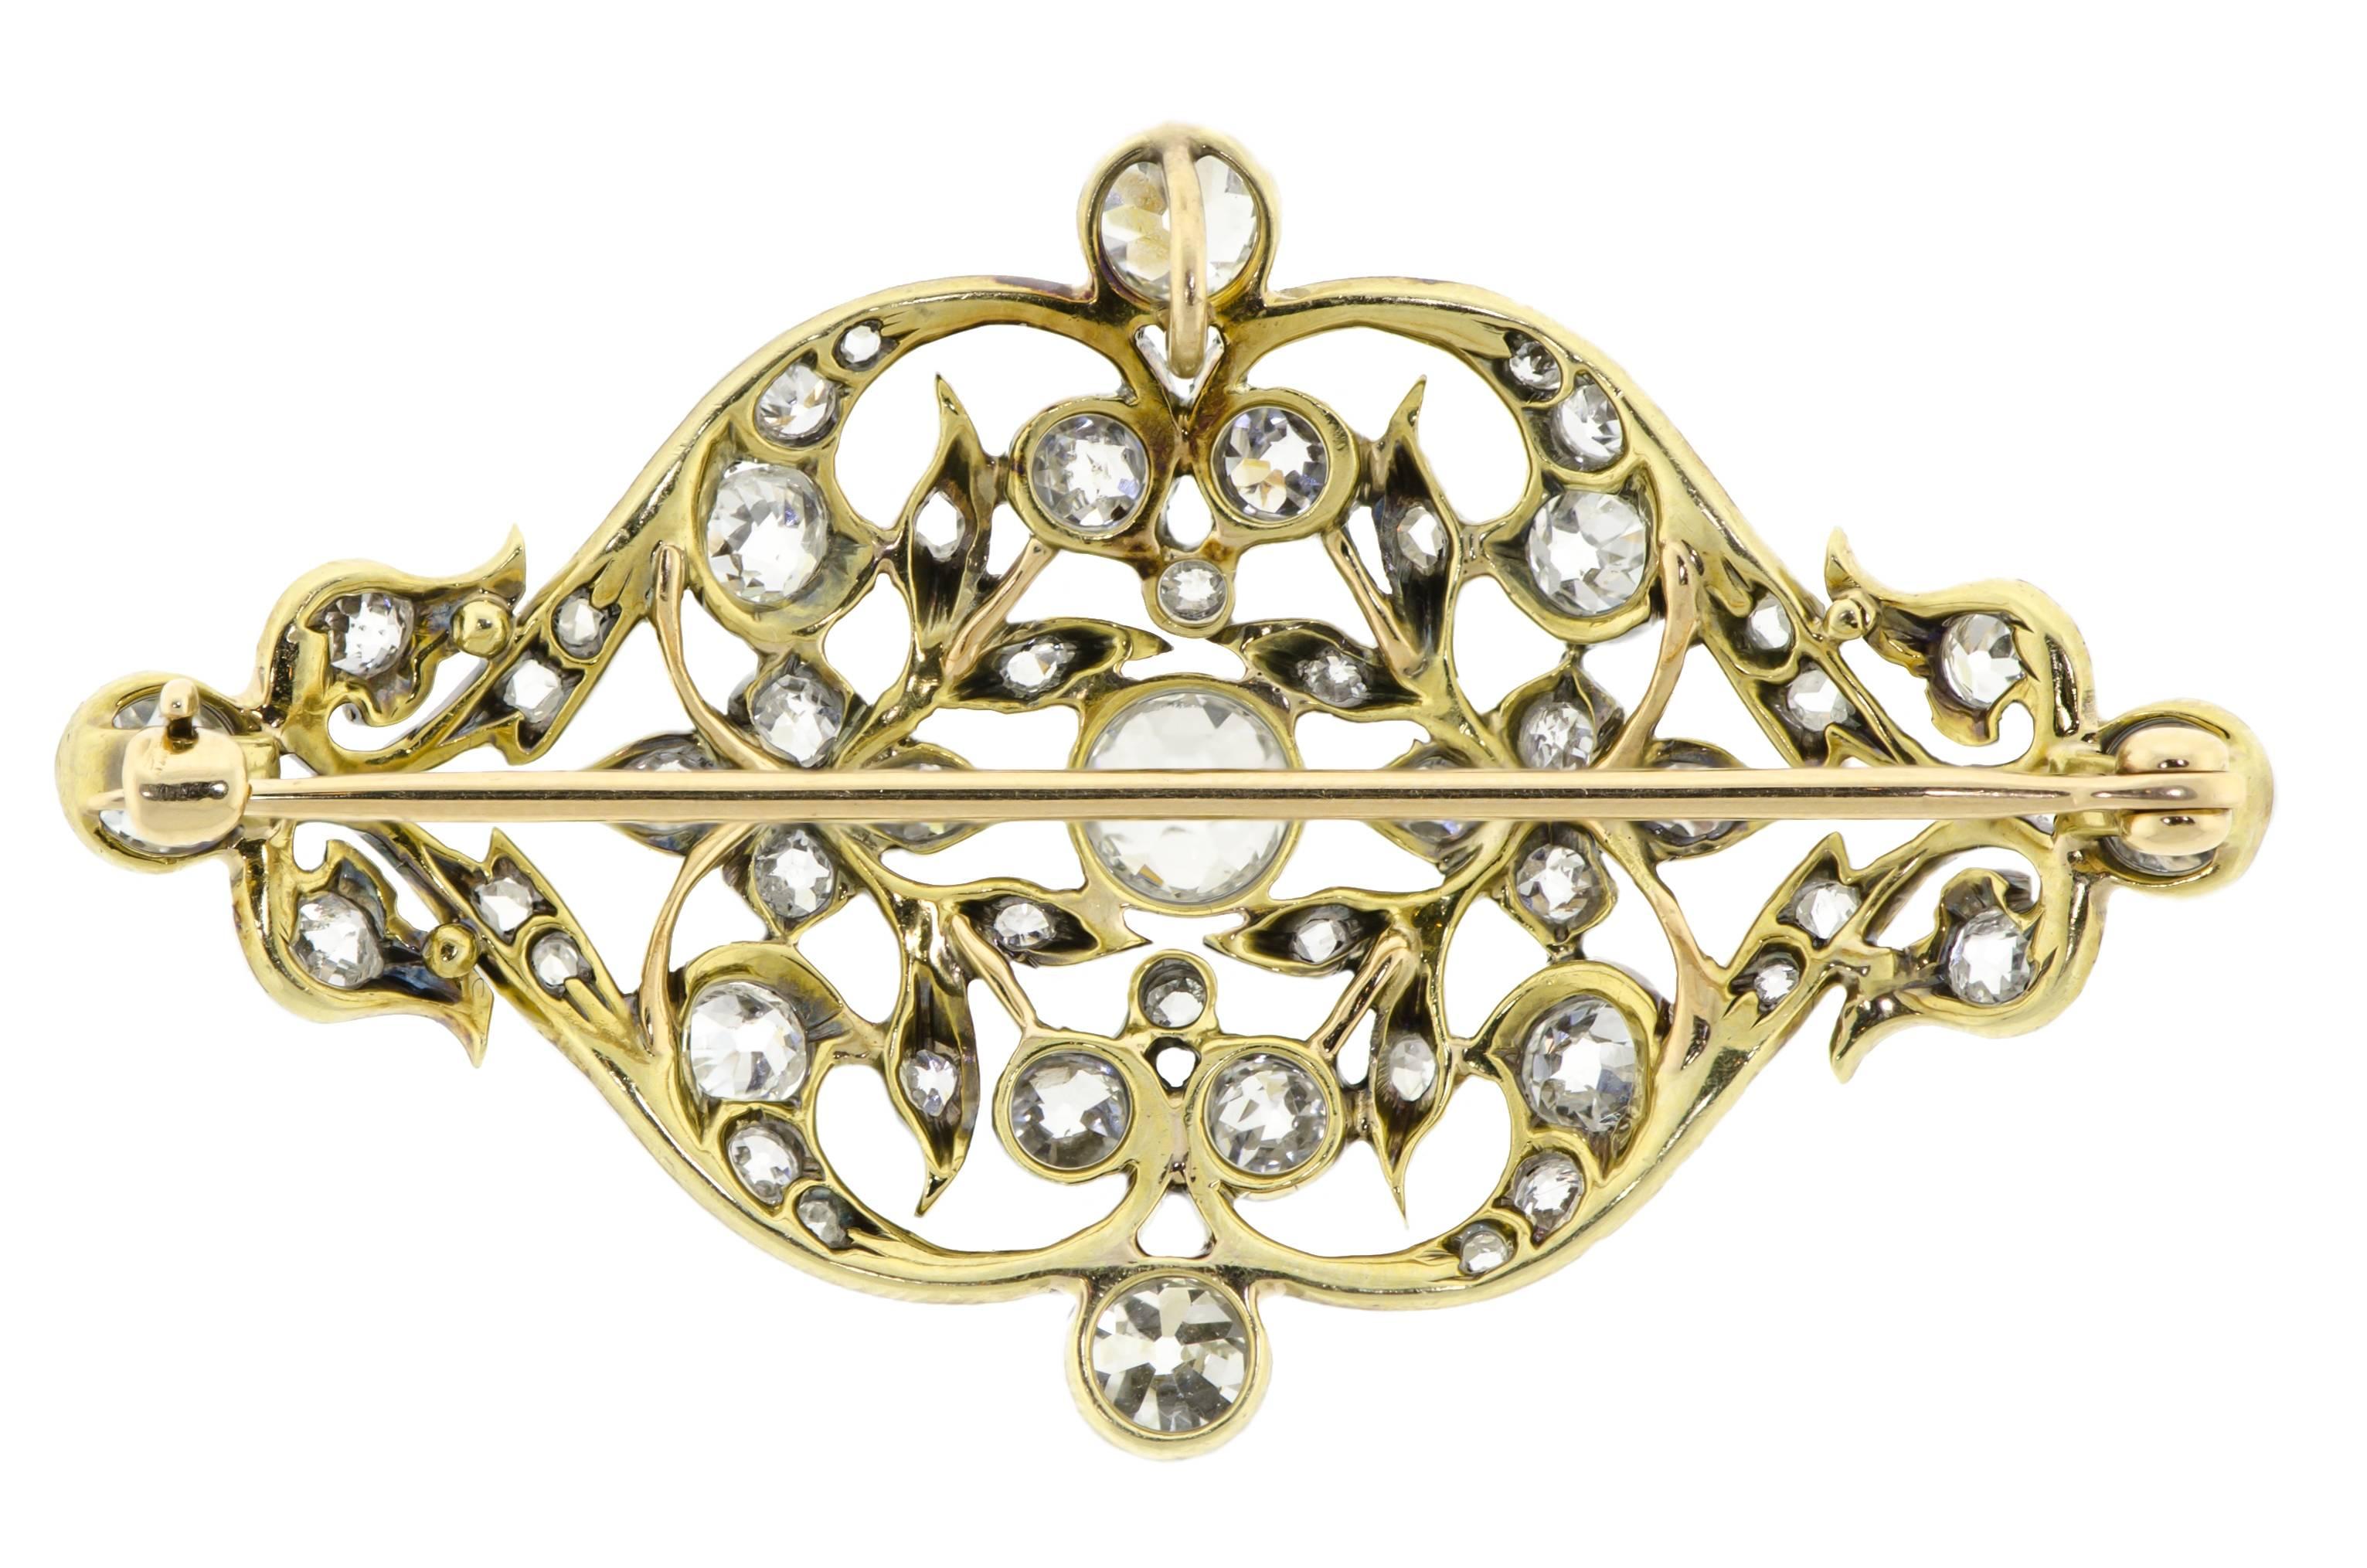 A stunning Edwardian brooch that dates back to the second half of the nineteenth century. Fluidly hand-fabricated in platinum and sparkle with approximately 3 cts of Old European Cut diamond ribbons which create an elegant, stunning and dazzling